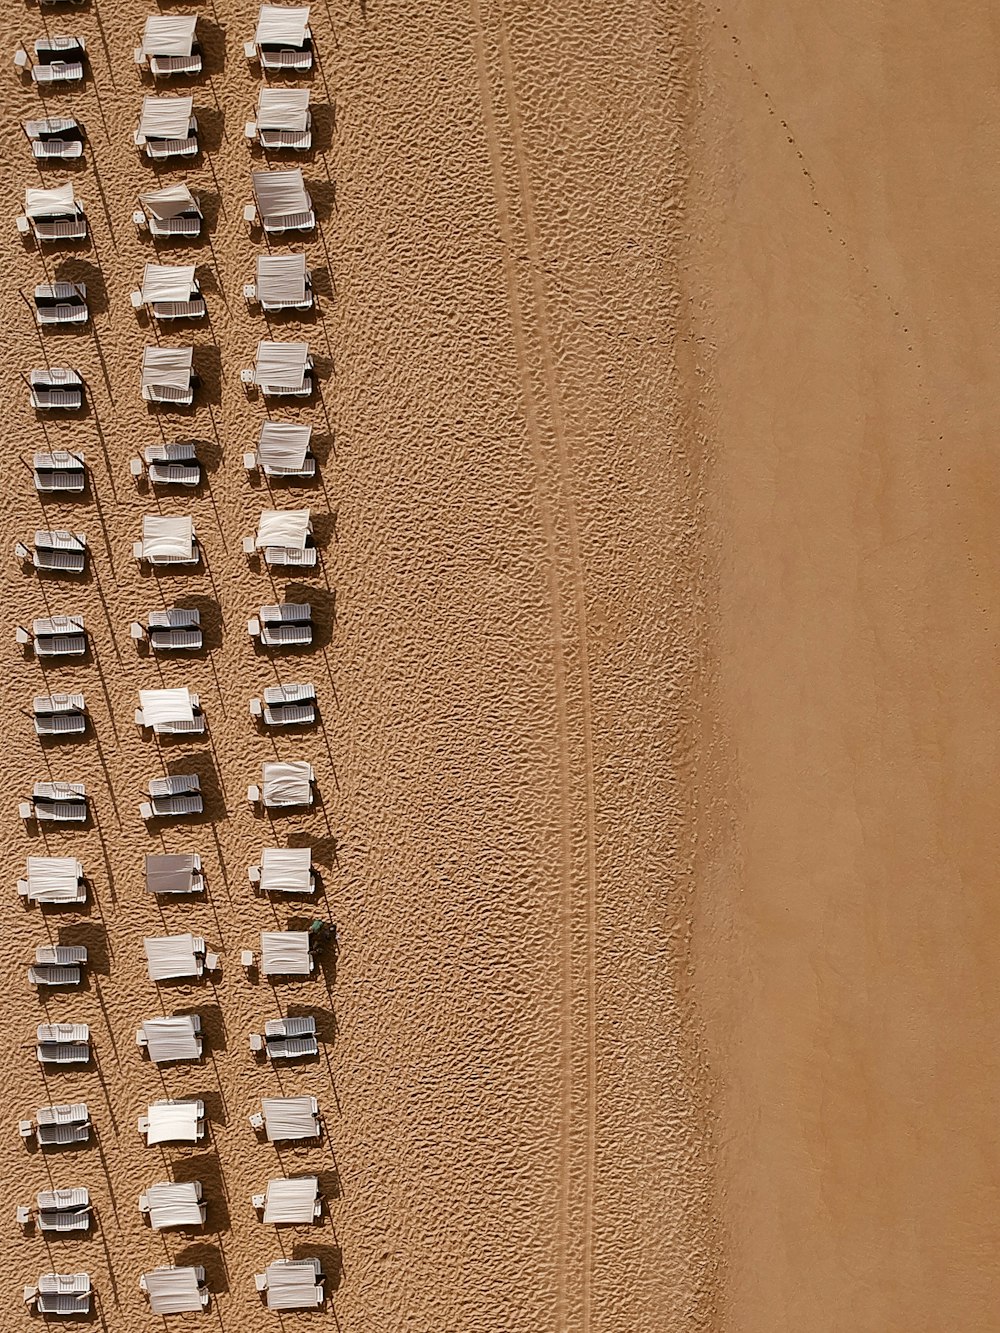 aerial photography of sunloungers